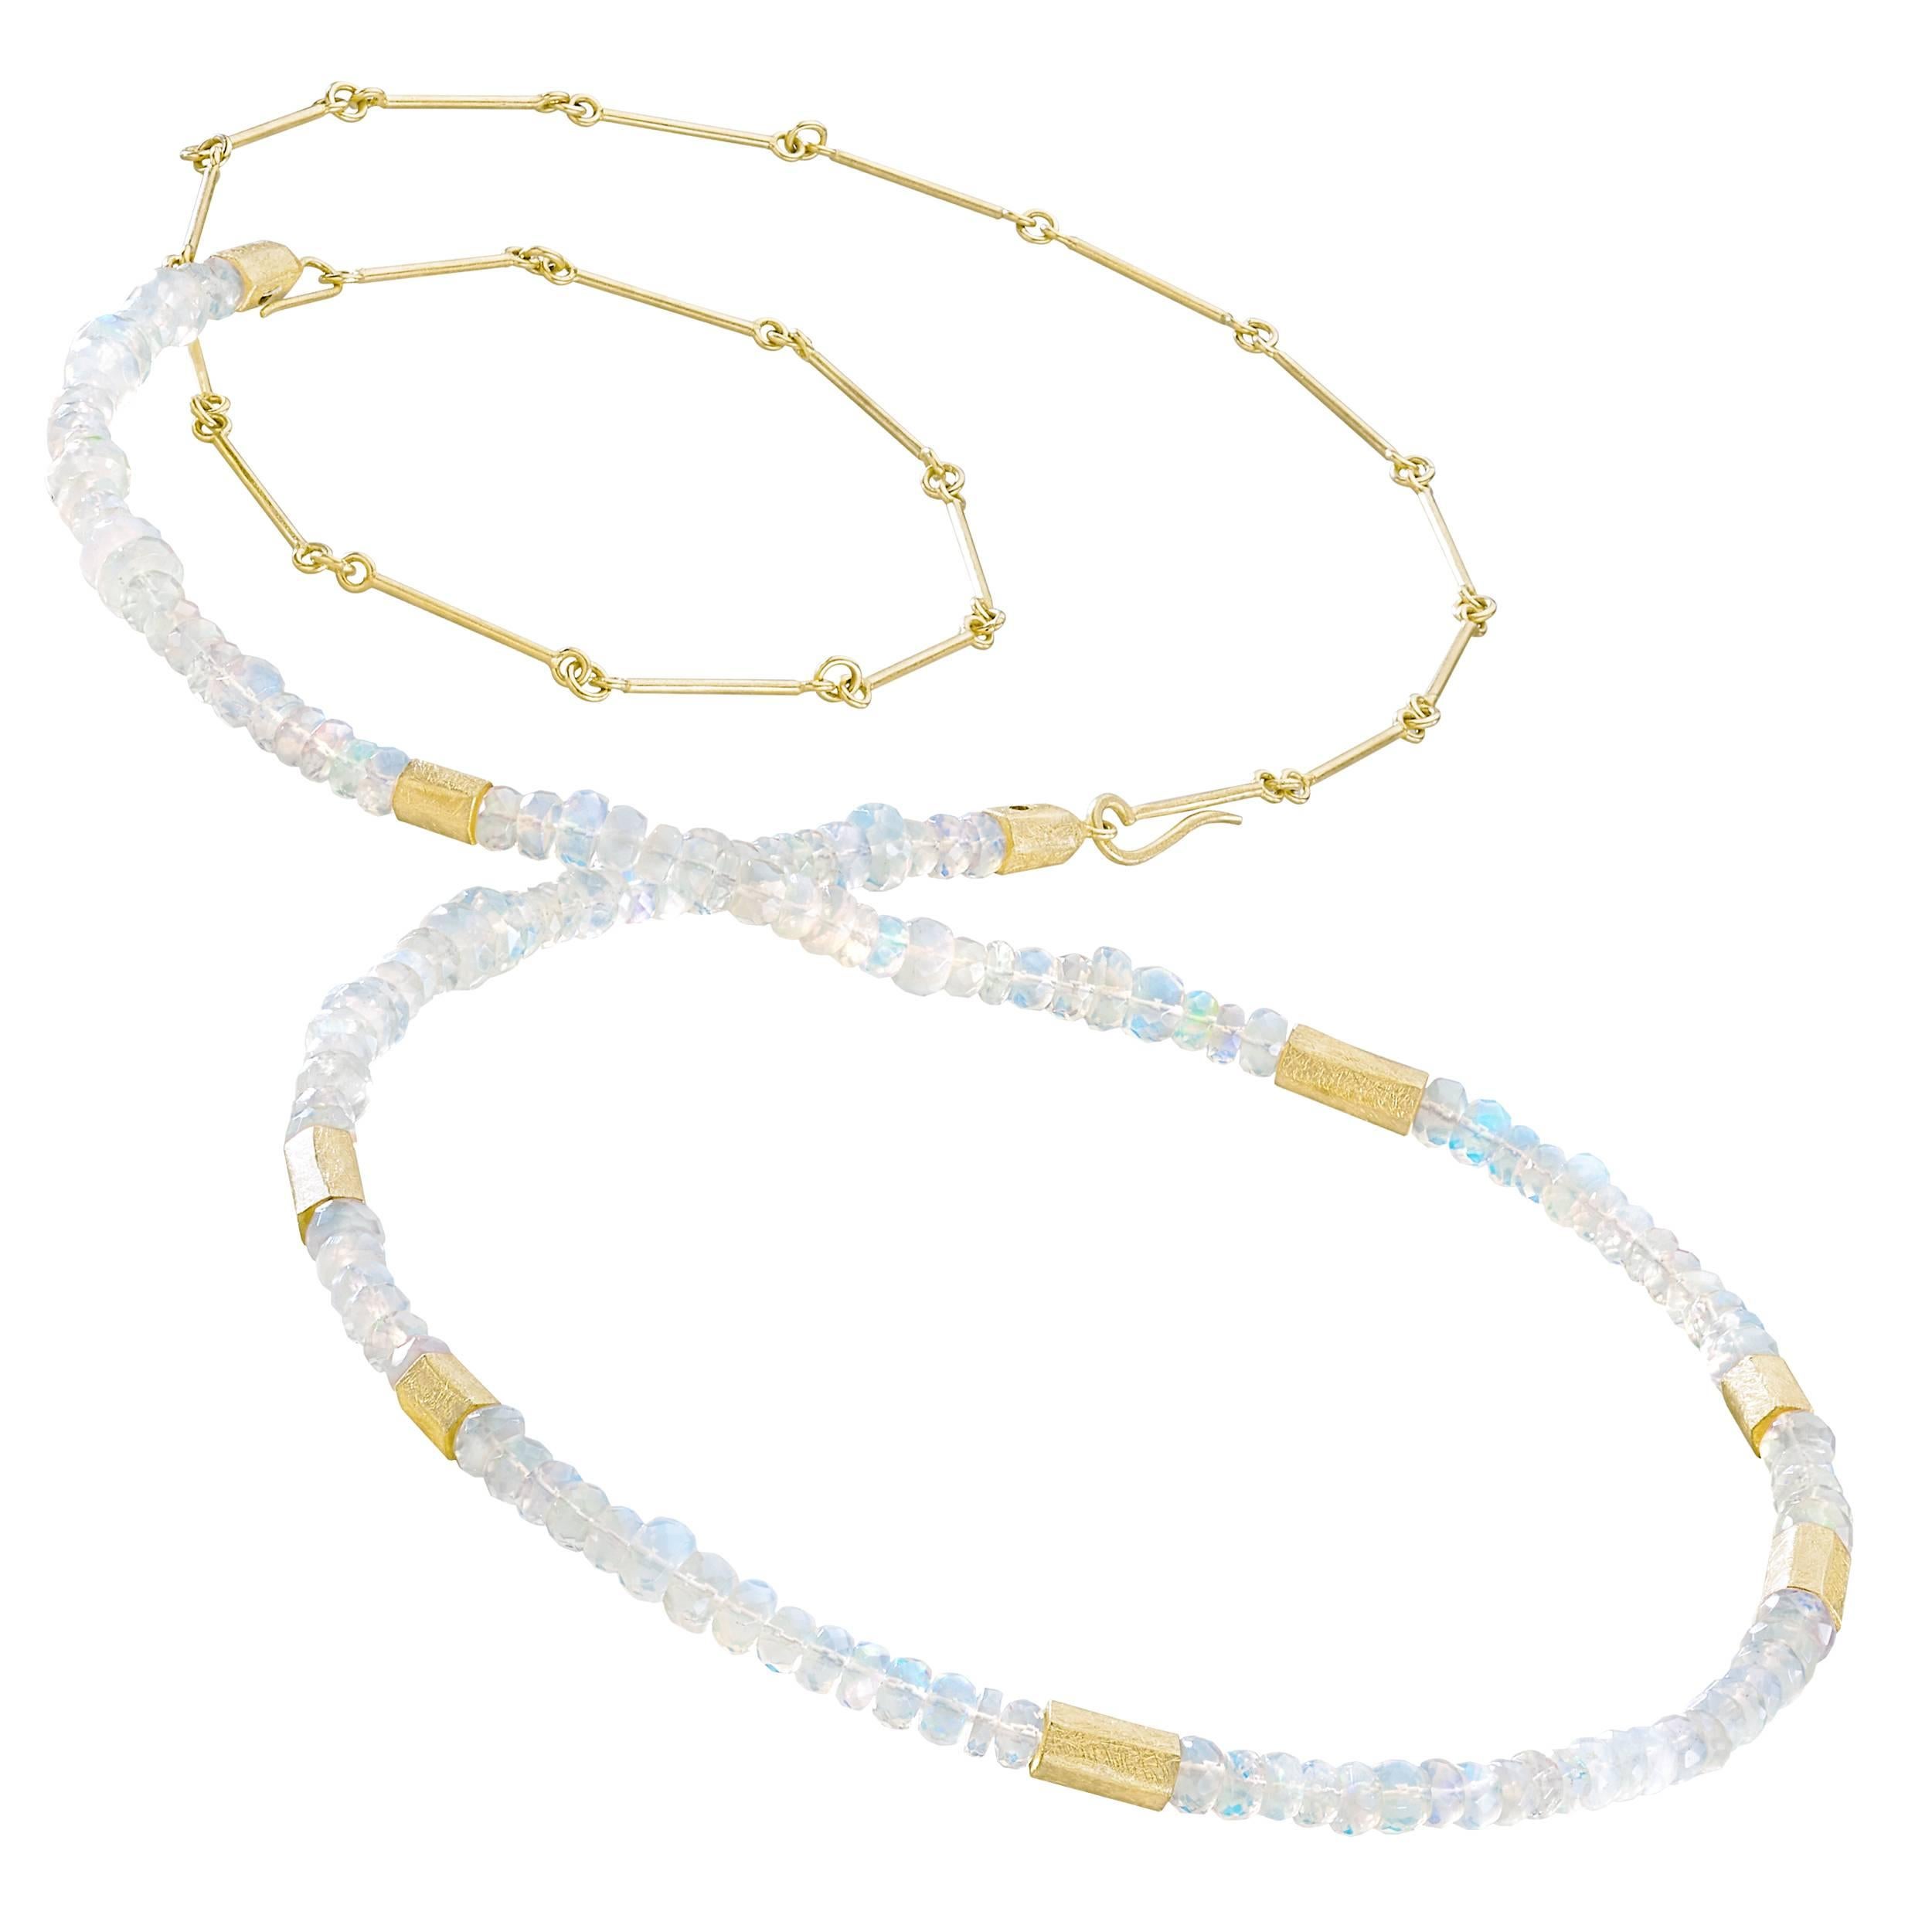 Petra Class Faceted Ethiopian Opal Strand with Detachable Chain Double Necklace